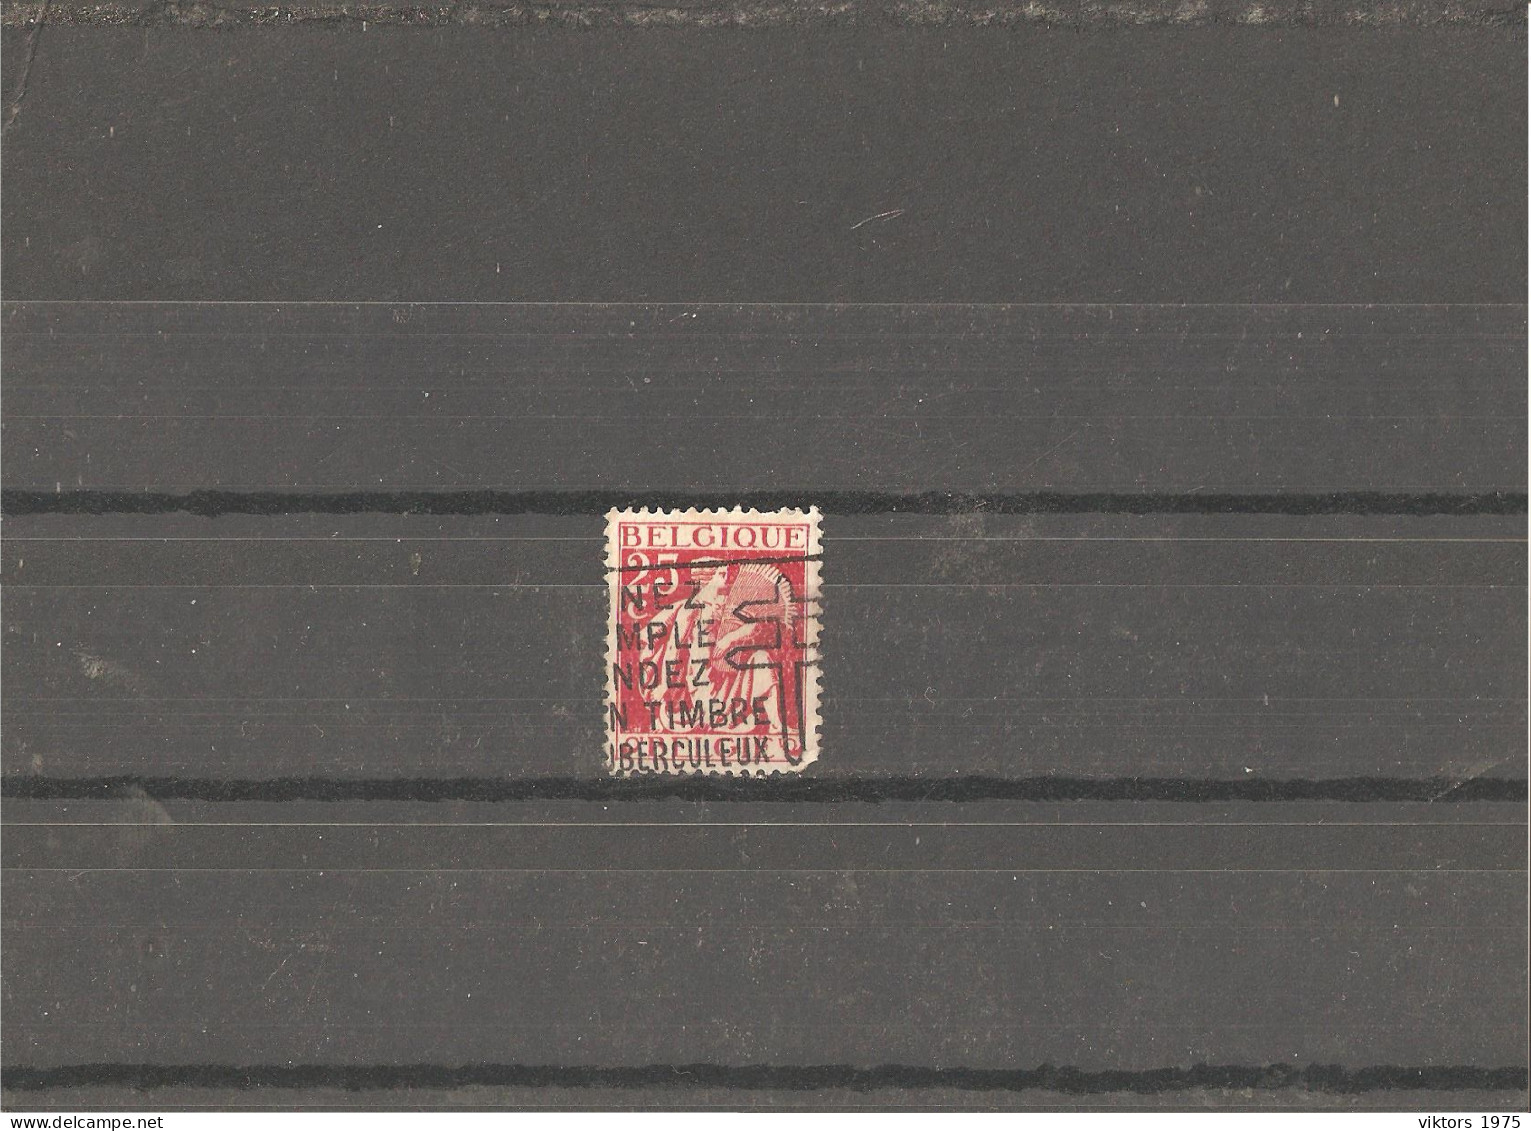 Used Stamp Nr.330 In MICHEL Catalog - Used Stamps